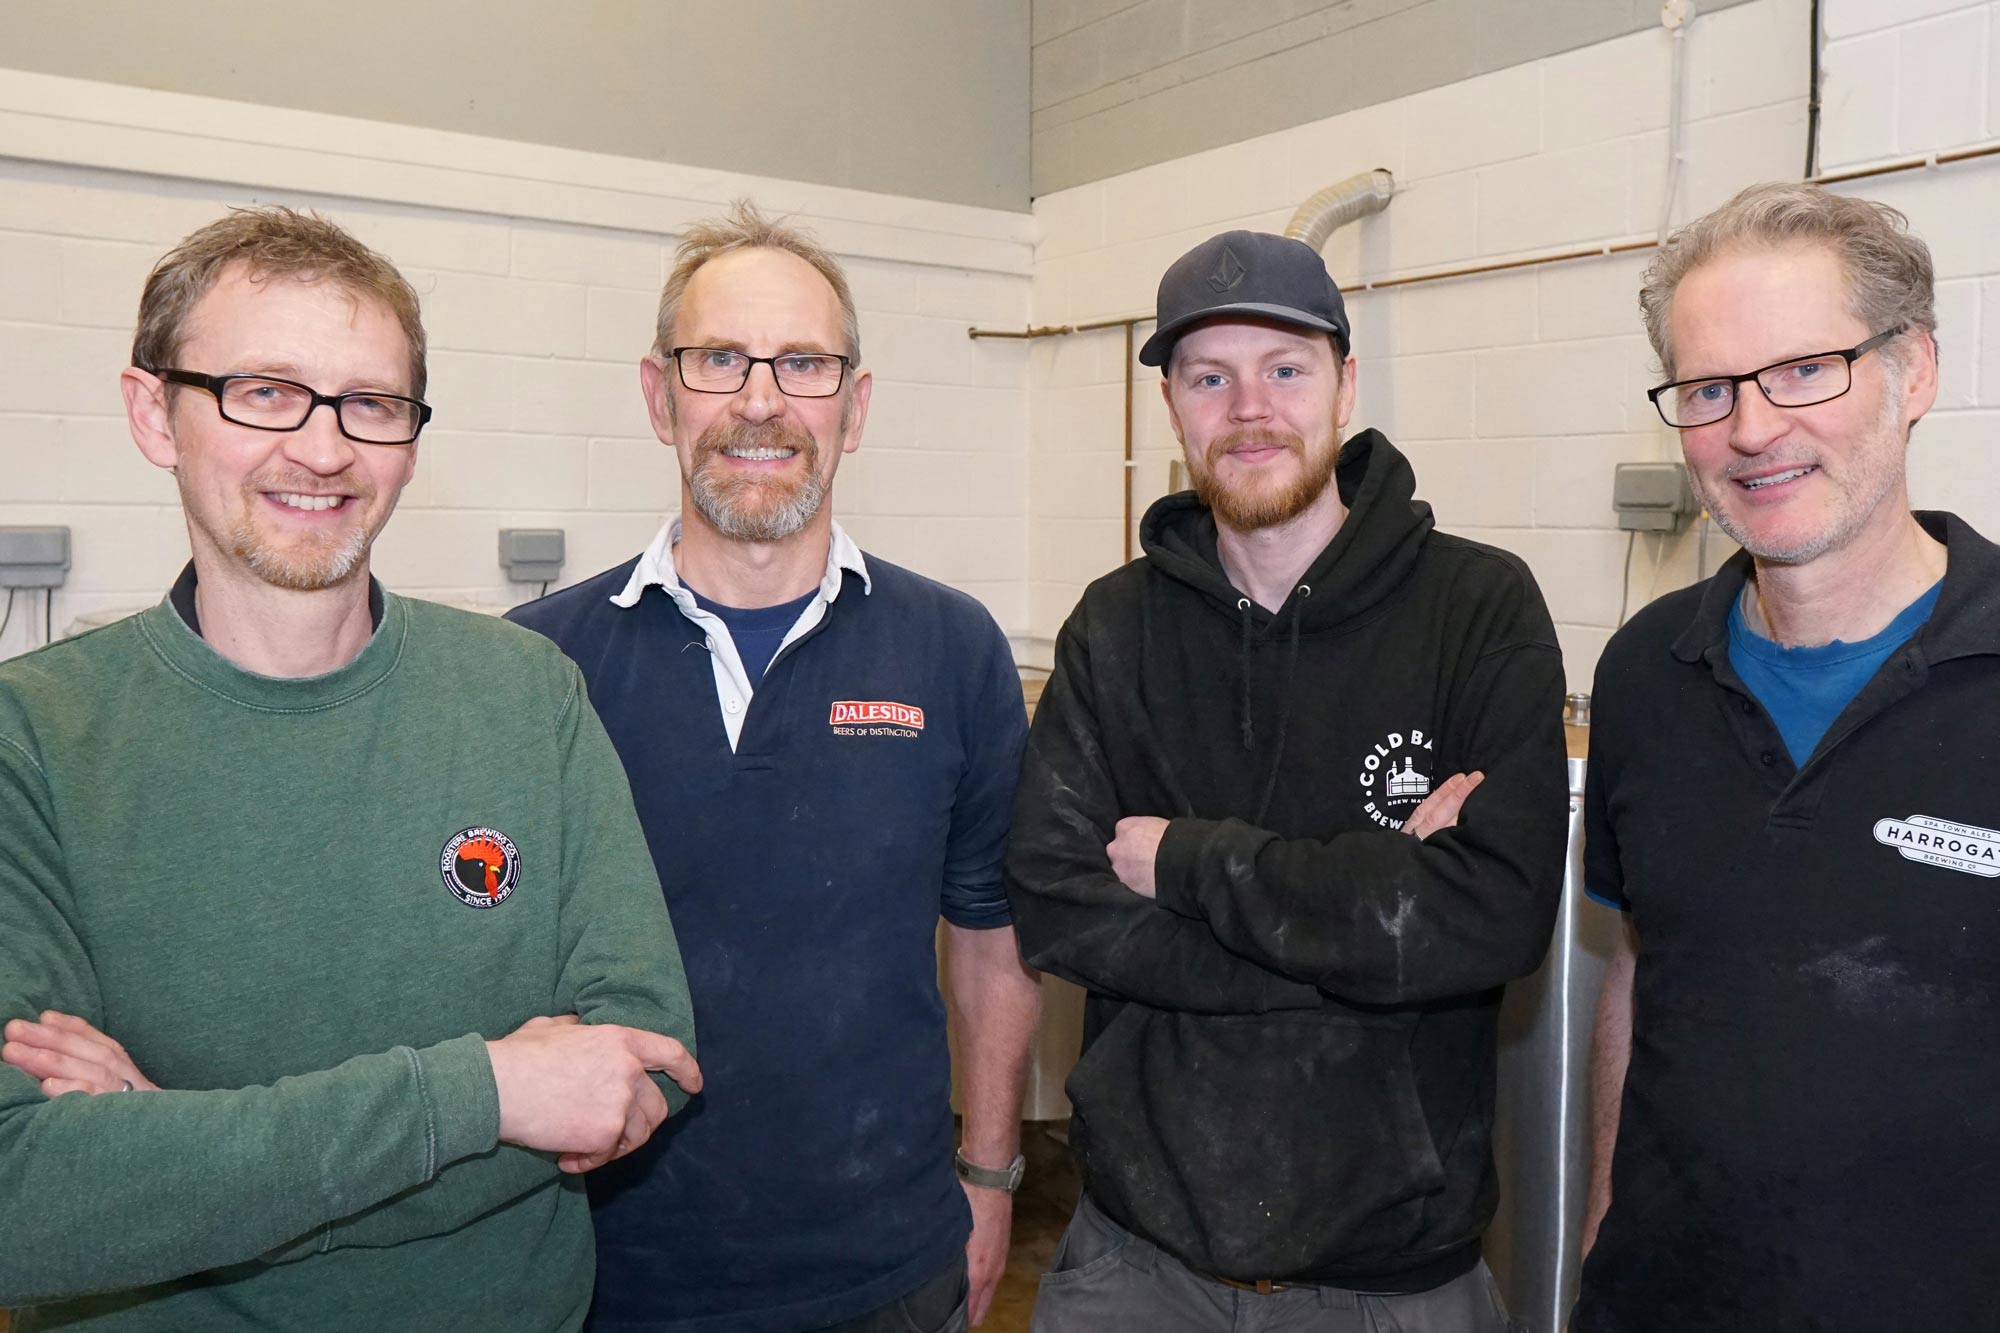 Stewart Goddard, Brewing Team Leader at Rooster's, Craig Witty, brewer at Daleside, Matt Fortune, Cold Bath Brewery and Anton Stark from Harrogate Brewing Co.